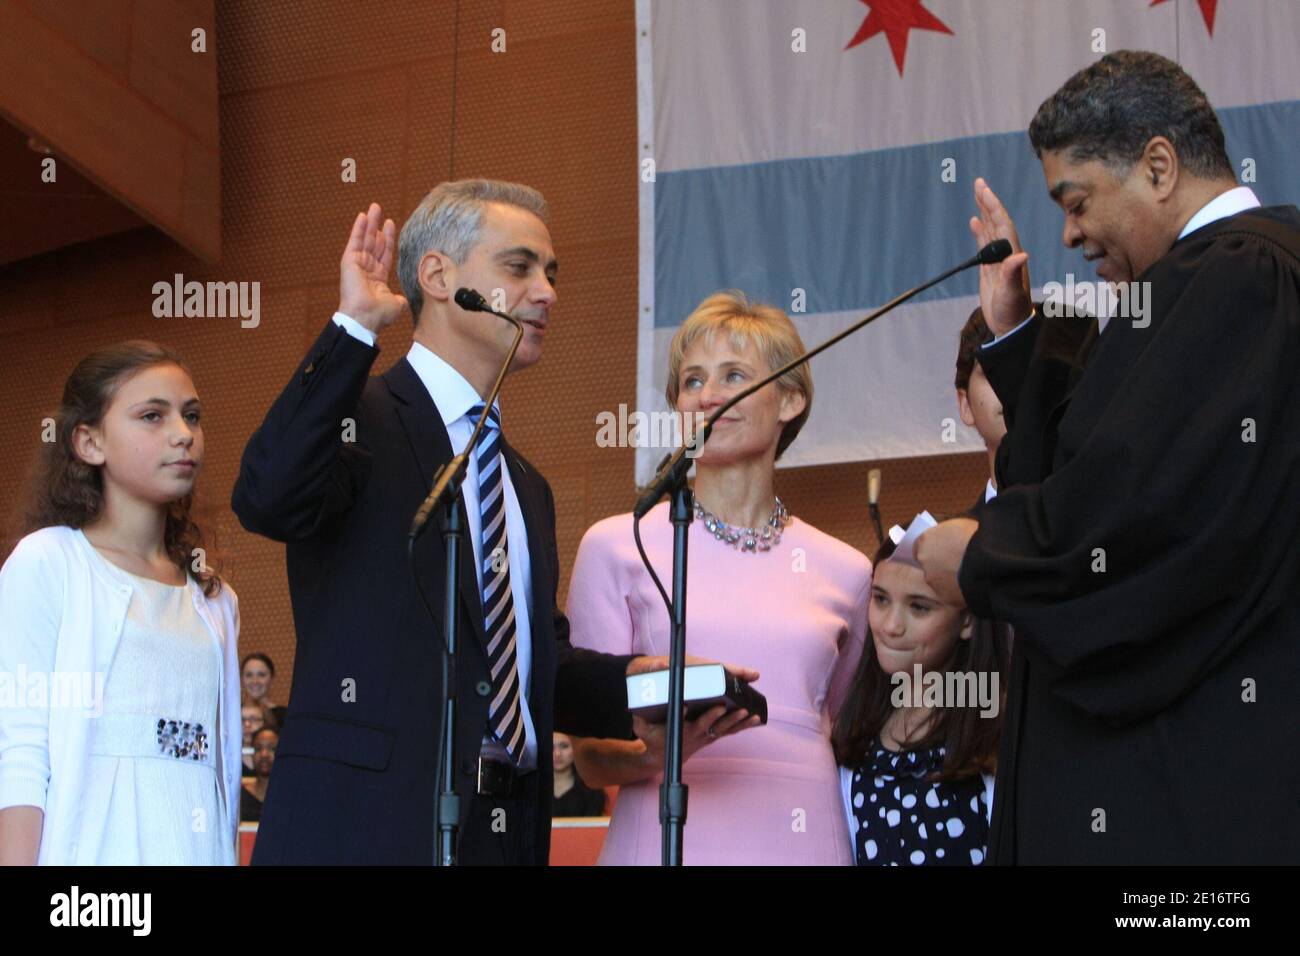 Mayor-elect Rahm Emanuel, wife Amy Rule Emanuel, children and Judge Timothy C. Evans on the stage for a swearing-in ceremony at Millenium Park in Chicago, Illinois on May 16, 2011. Photo by Alexandra Buxbaum/ABACAPRESS.COM Stock Photo